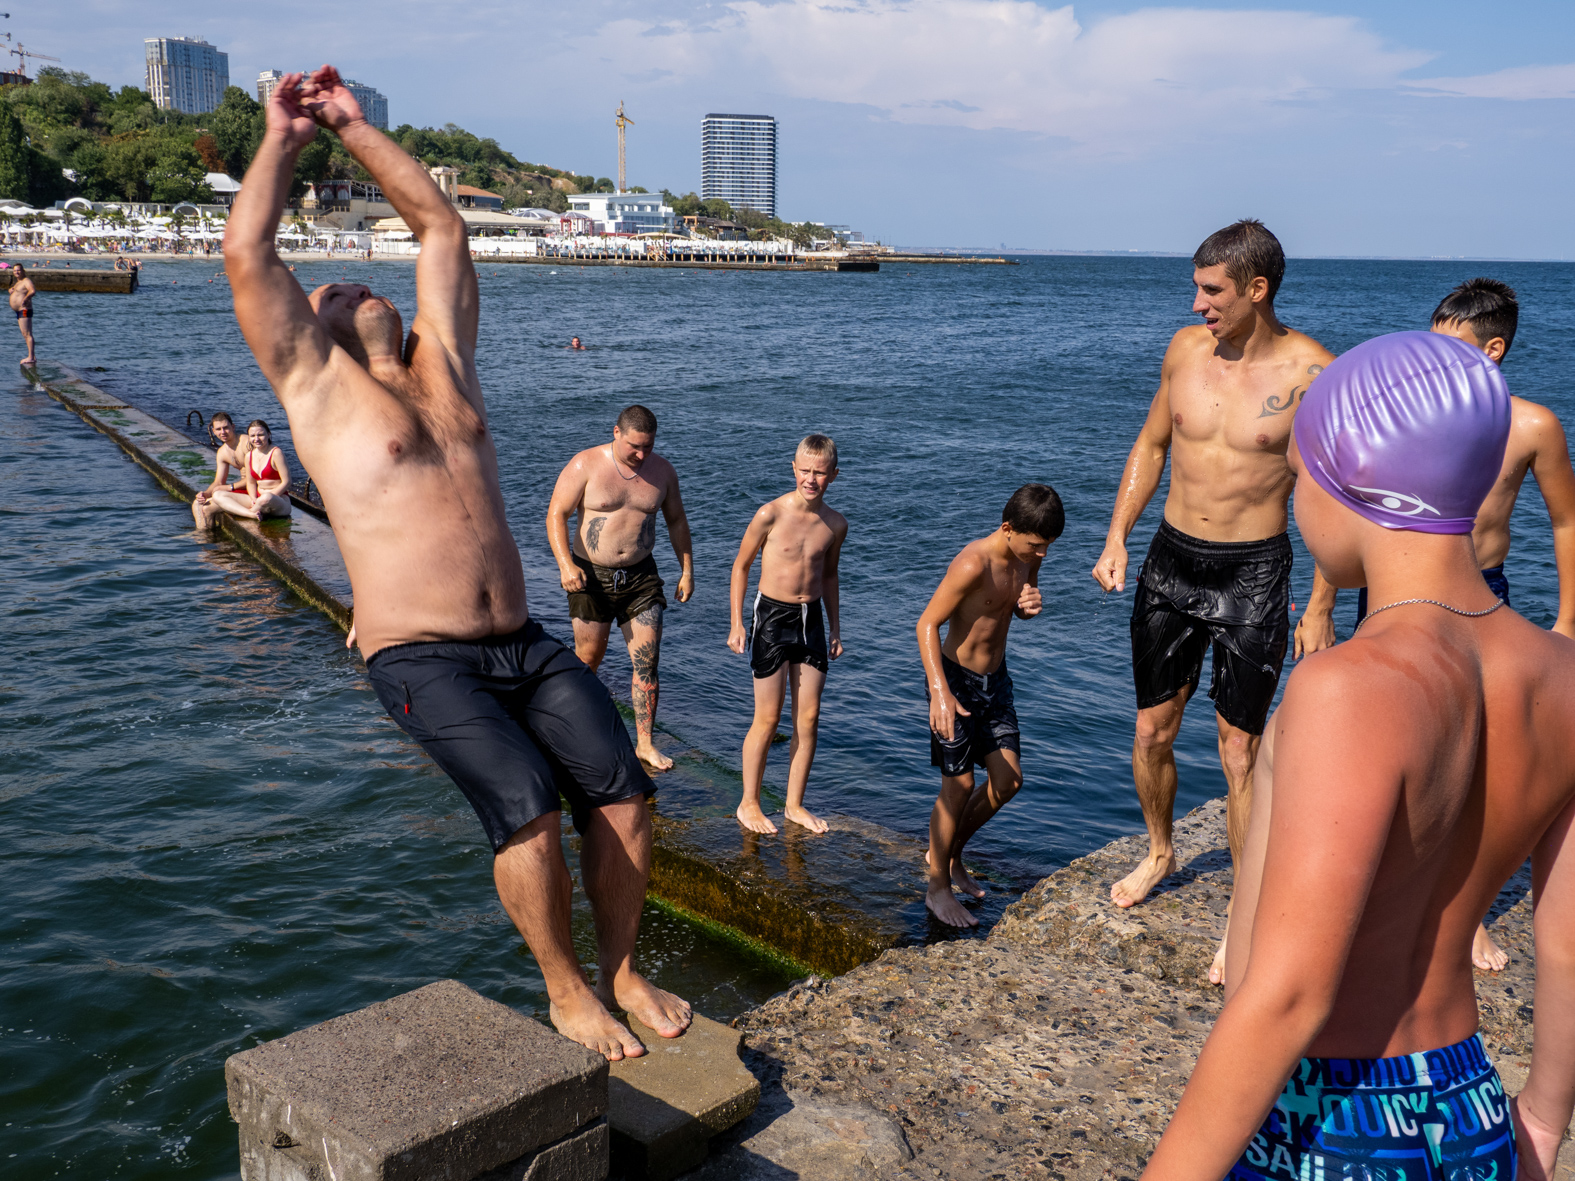 ODESSA, UKRAINE - AUGUST 26:  Visitors to the  beach on August 26, 2023 in Odessa, Ukraine. Several beaches in Ukraine's Black Sea city port of Odessa were officially reopened for swimming for the first time since the start of the Russian invasion, bathing remained banned during air raid alerts, an Anti-mine net was placed in between two piers to prevent swimmers encountering shallow-water mines many of which were dislodged by flood waters from the destruction of Kakhovka dam under control of the Russian military. The opening of the beaches has been a welcome respite from the tensions of war. (Photo by Peter Dench/Getty Images)